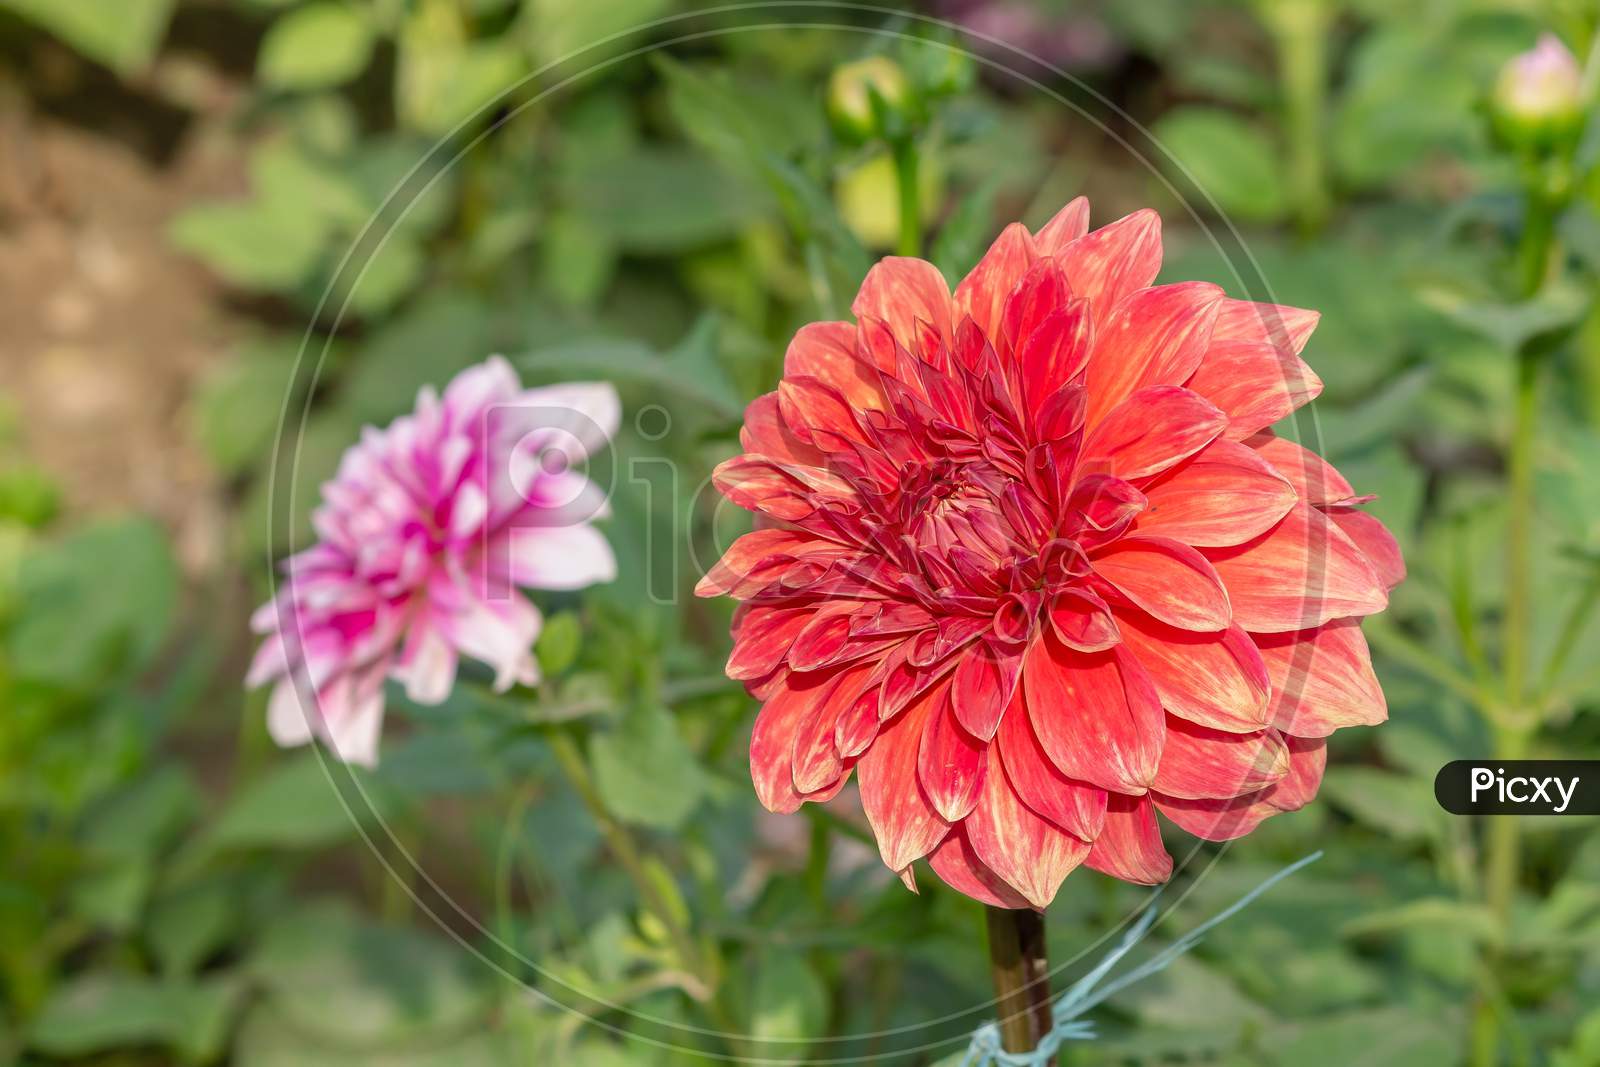 View Of Two Different Color Daisy Flower In The Park In Horizontal Frame